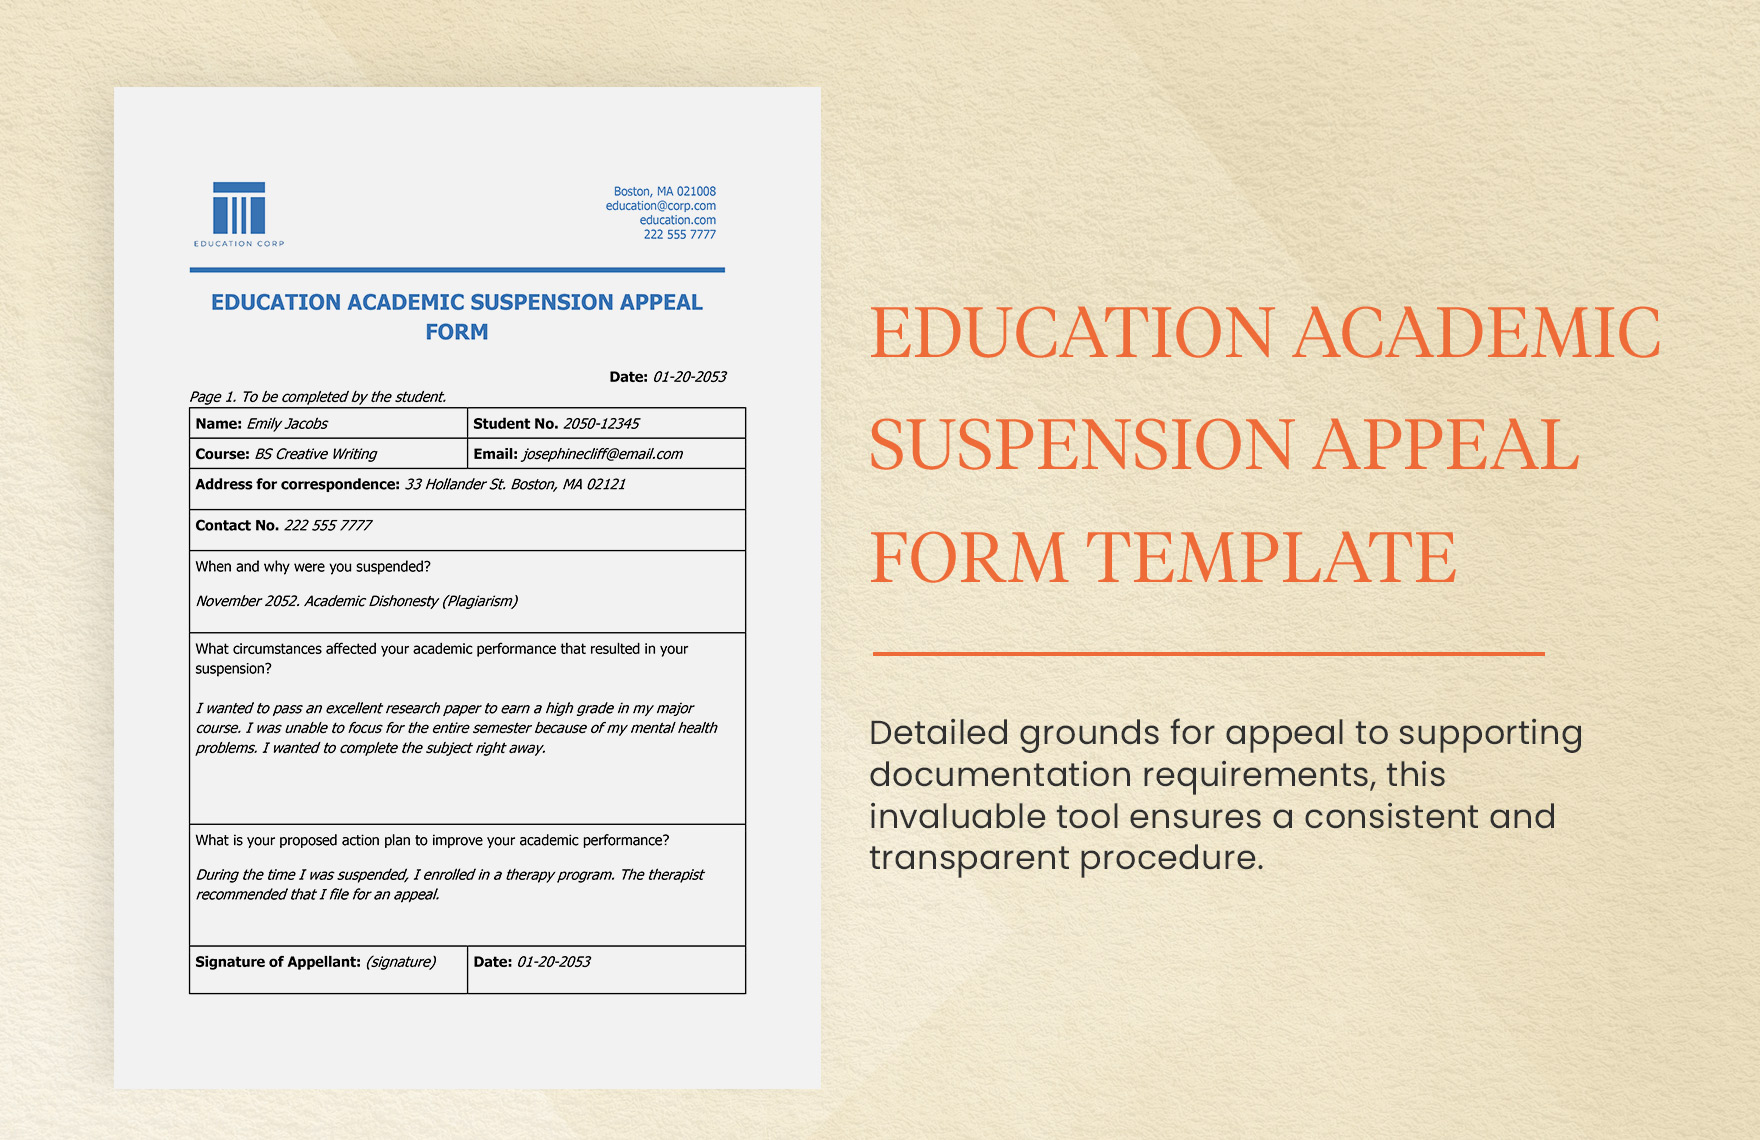 Education Academic Suspension Appeal Form Template in Word, Google Docs